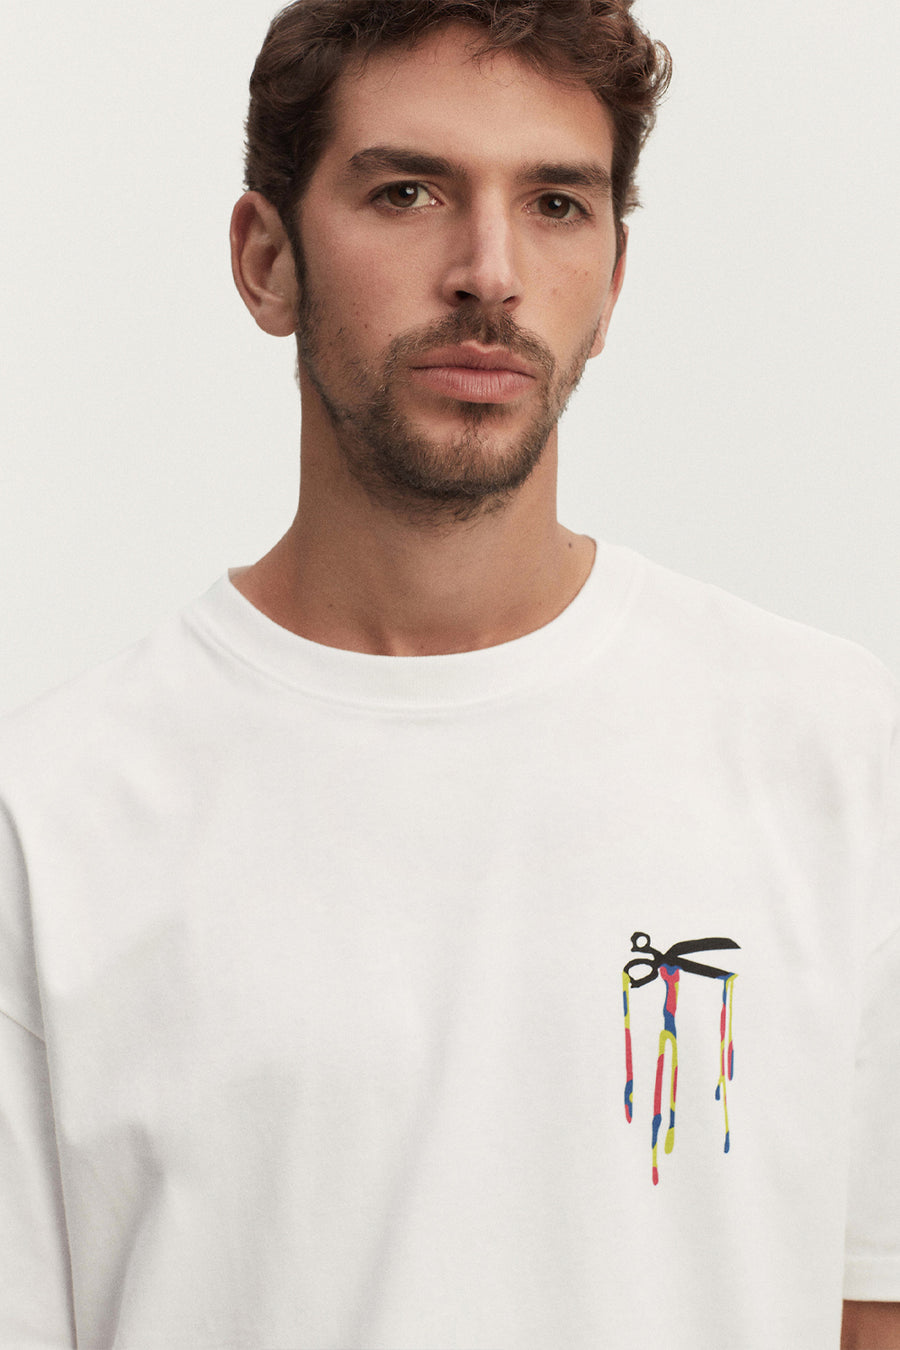 Buy the Denham Drip Boxy Fit T-Shirt in White at Intro. Spend £50 for free UK delivery. Official stockists. We ship worldwide.